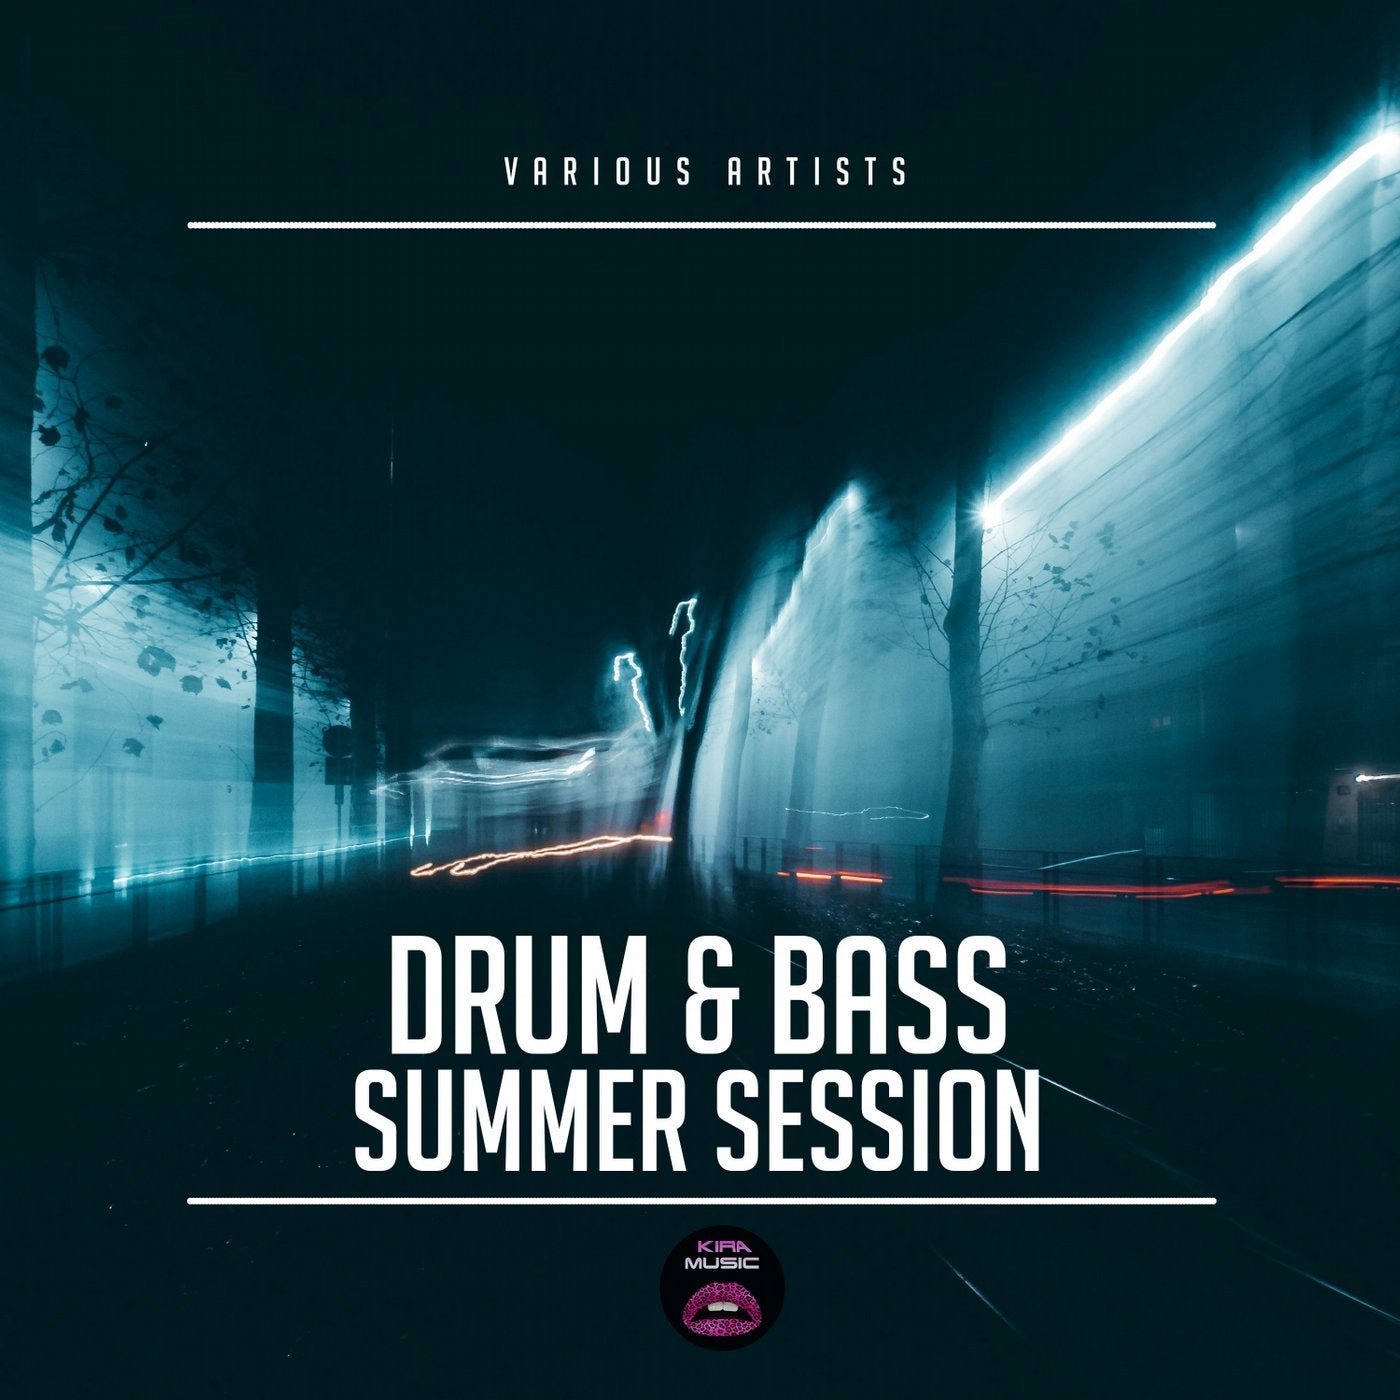 Drum & Bass Summer Session